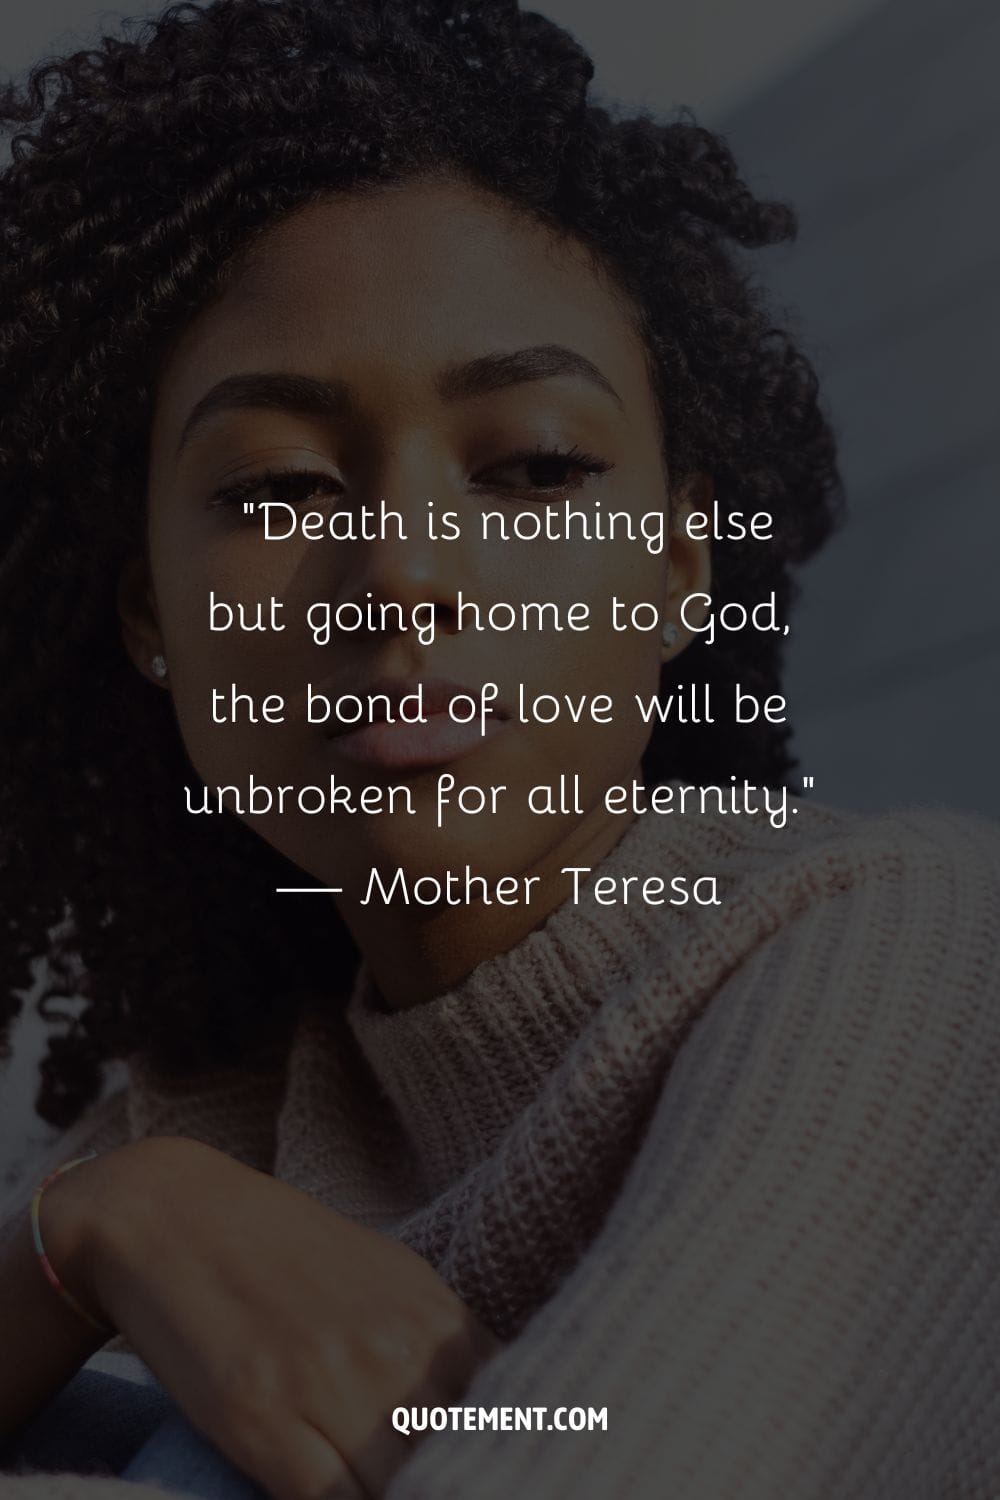 melancholic young black woman, gazing off to the side representing a religious death of a loved one quote